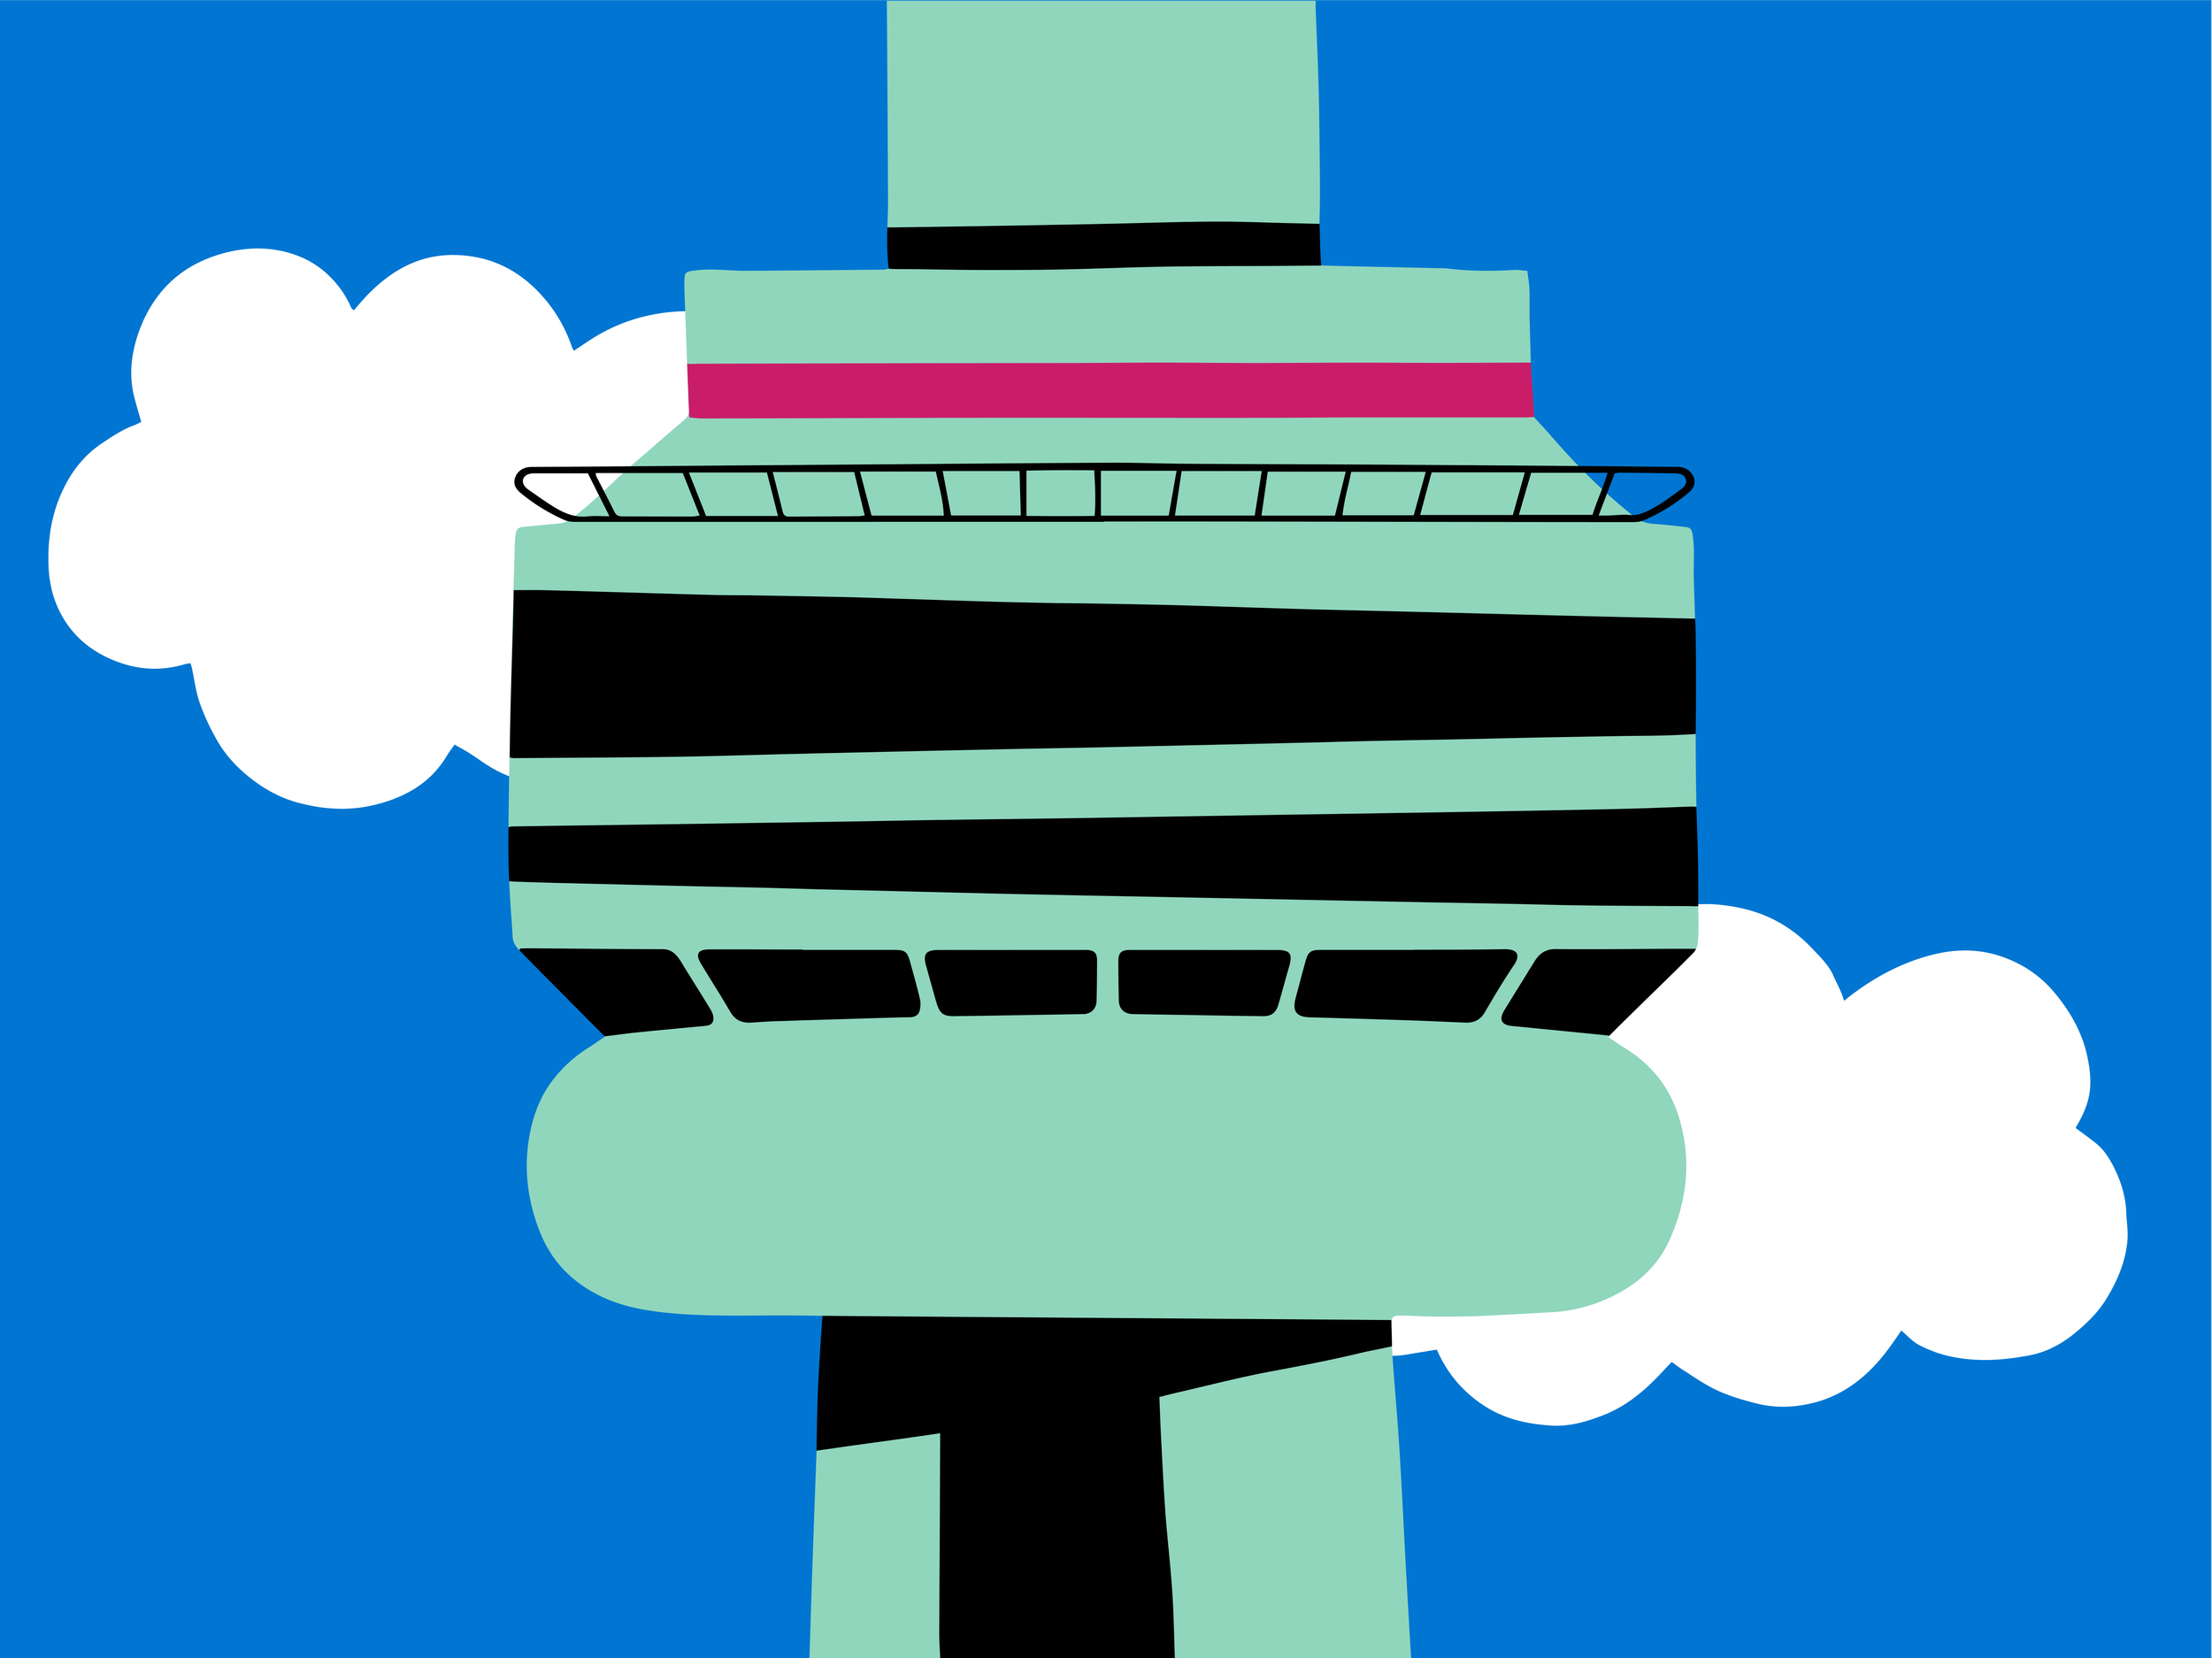 CN TOWER - CLOSE UP for up express - illustration by melissa martin of halfsquare designs.png